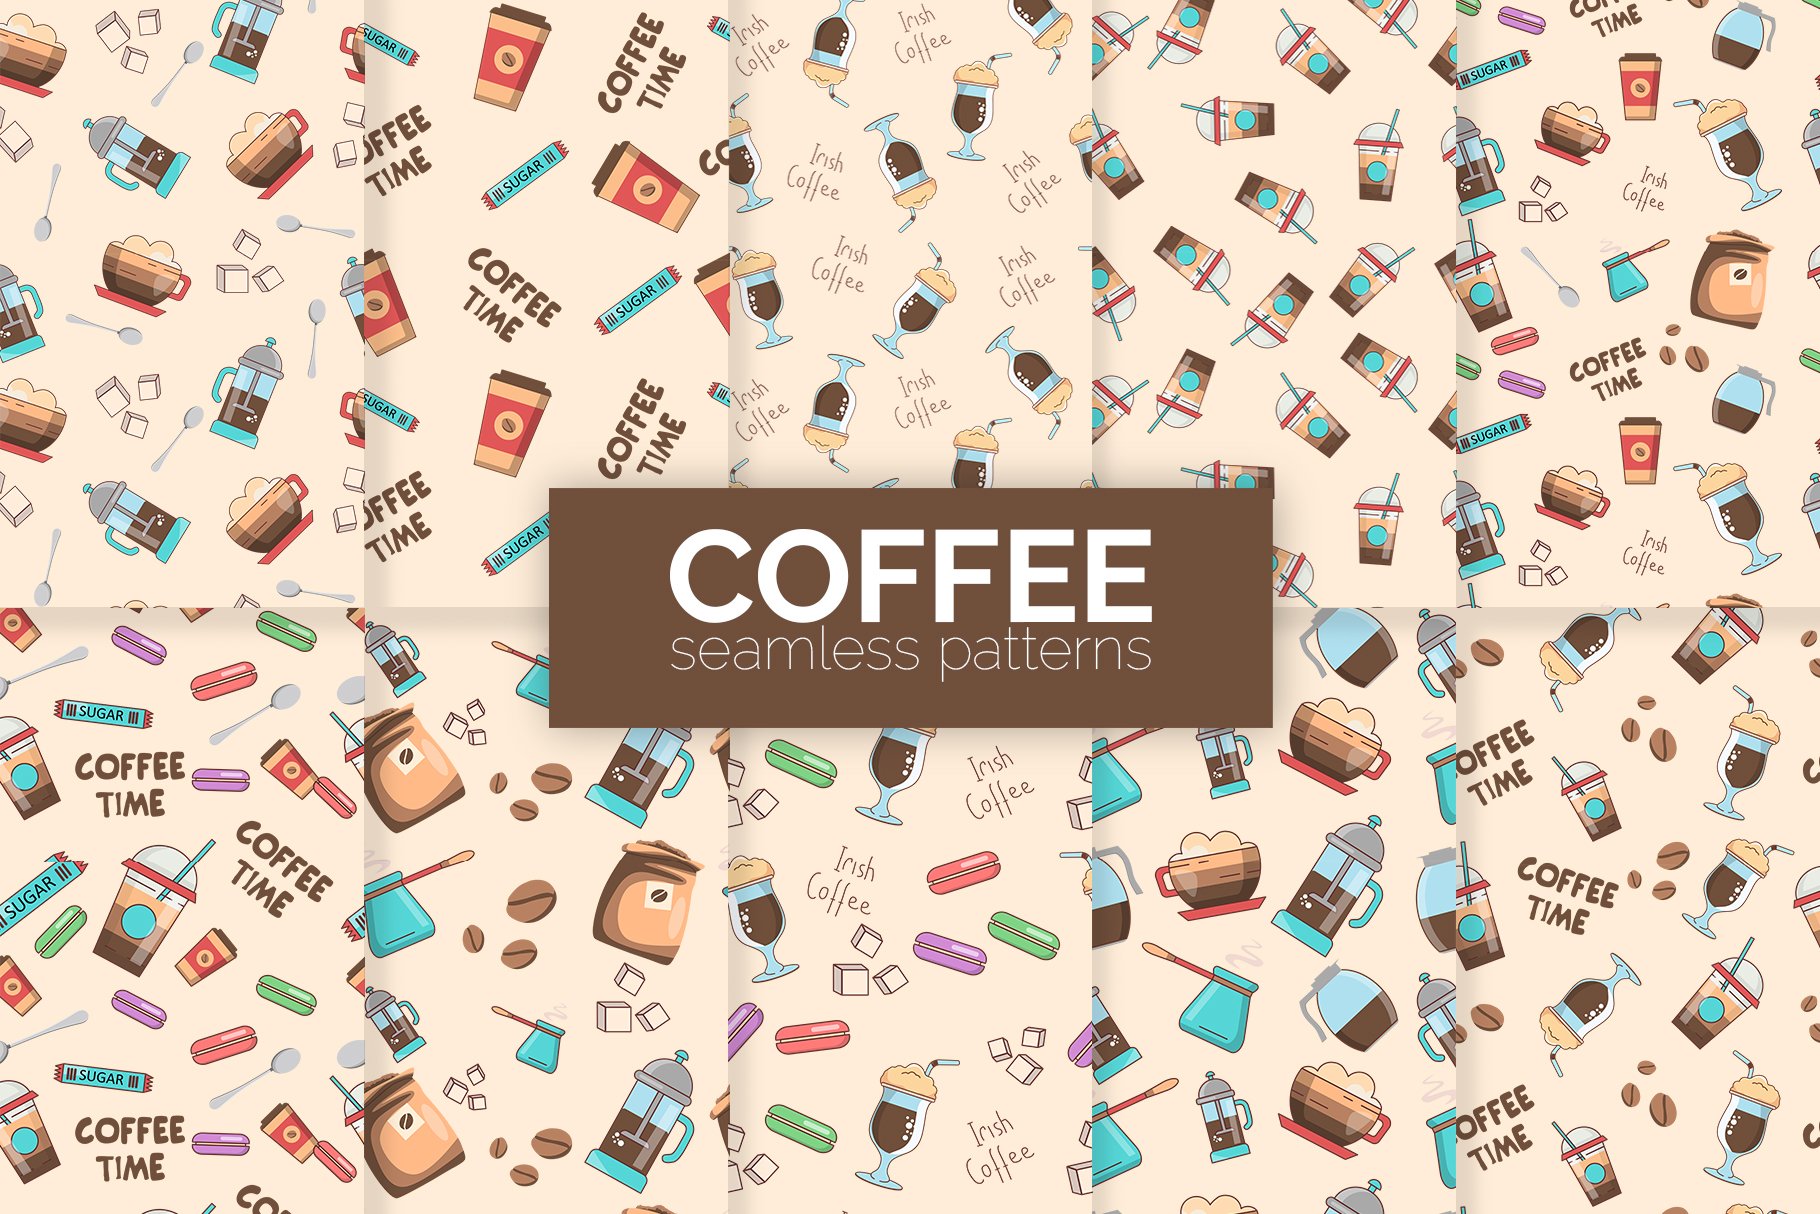 Coffee Seamless Patterns cover image.